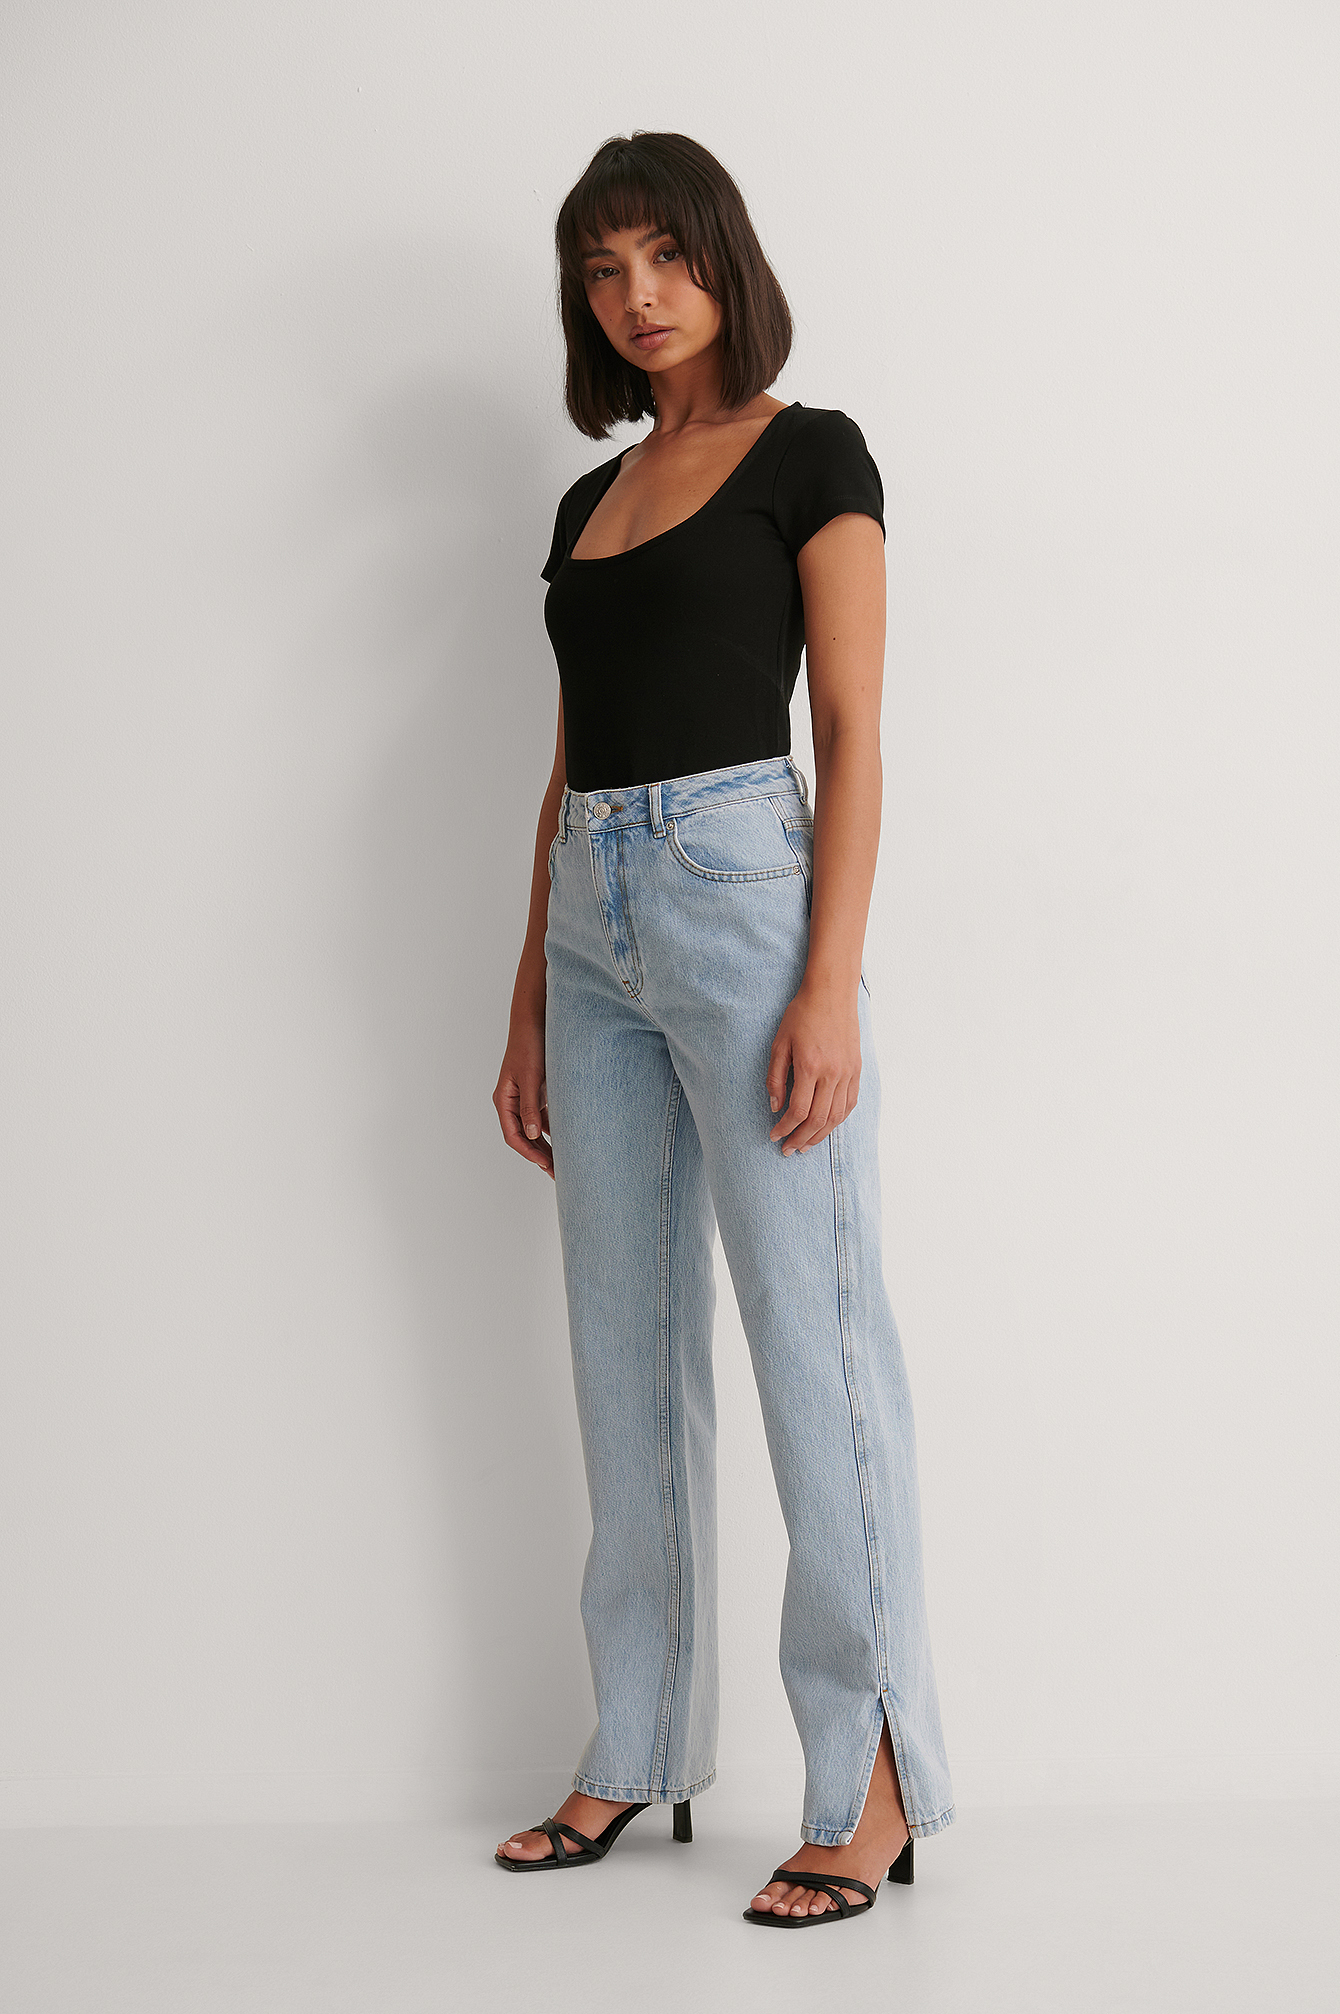 High Waist Straight Slide Slit Jeans Outfit.